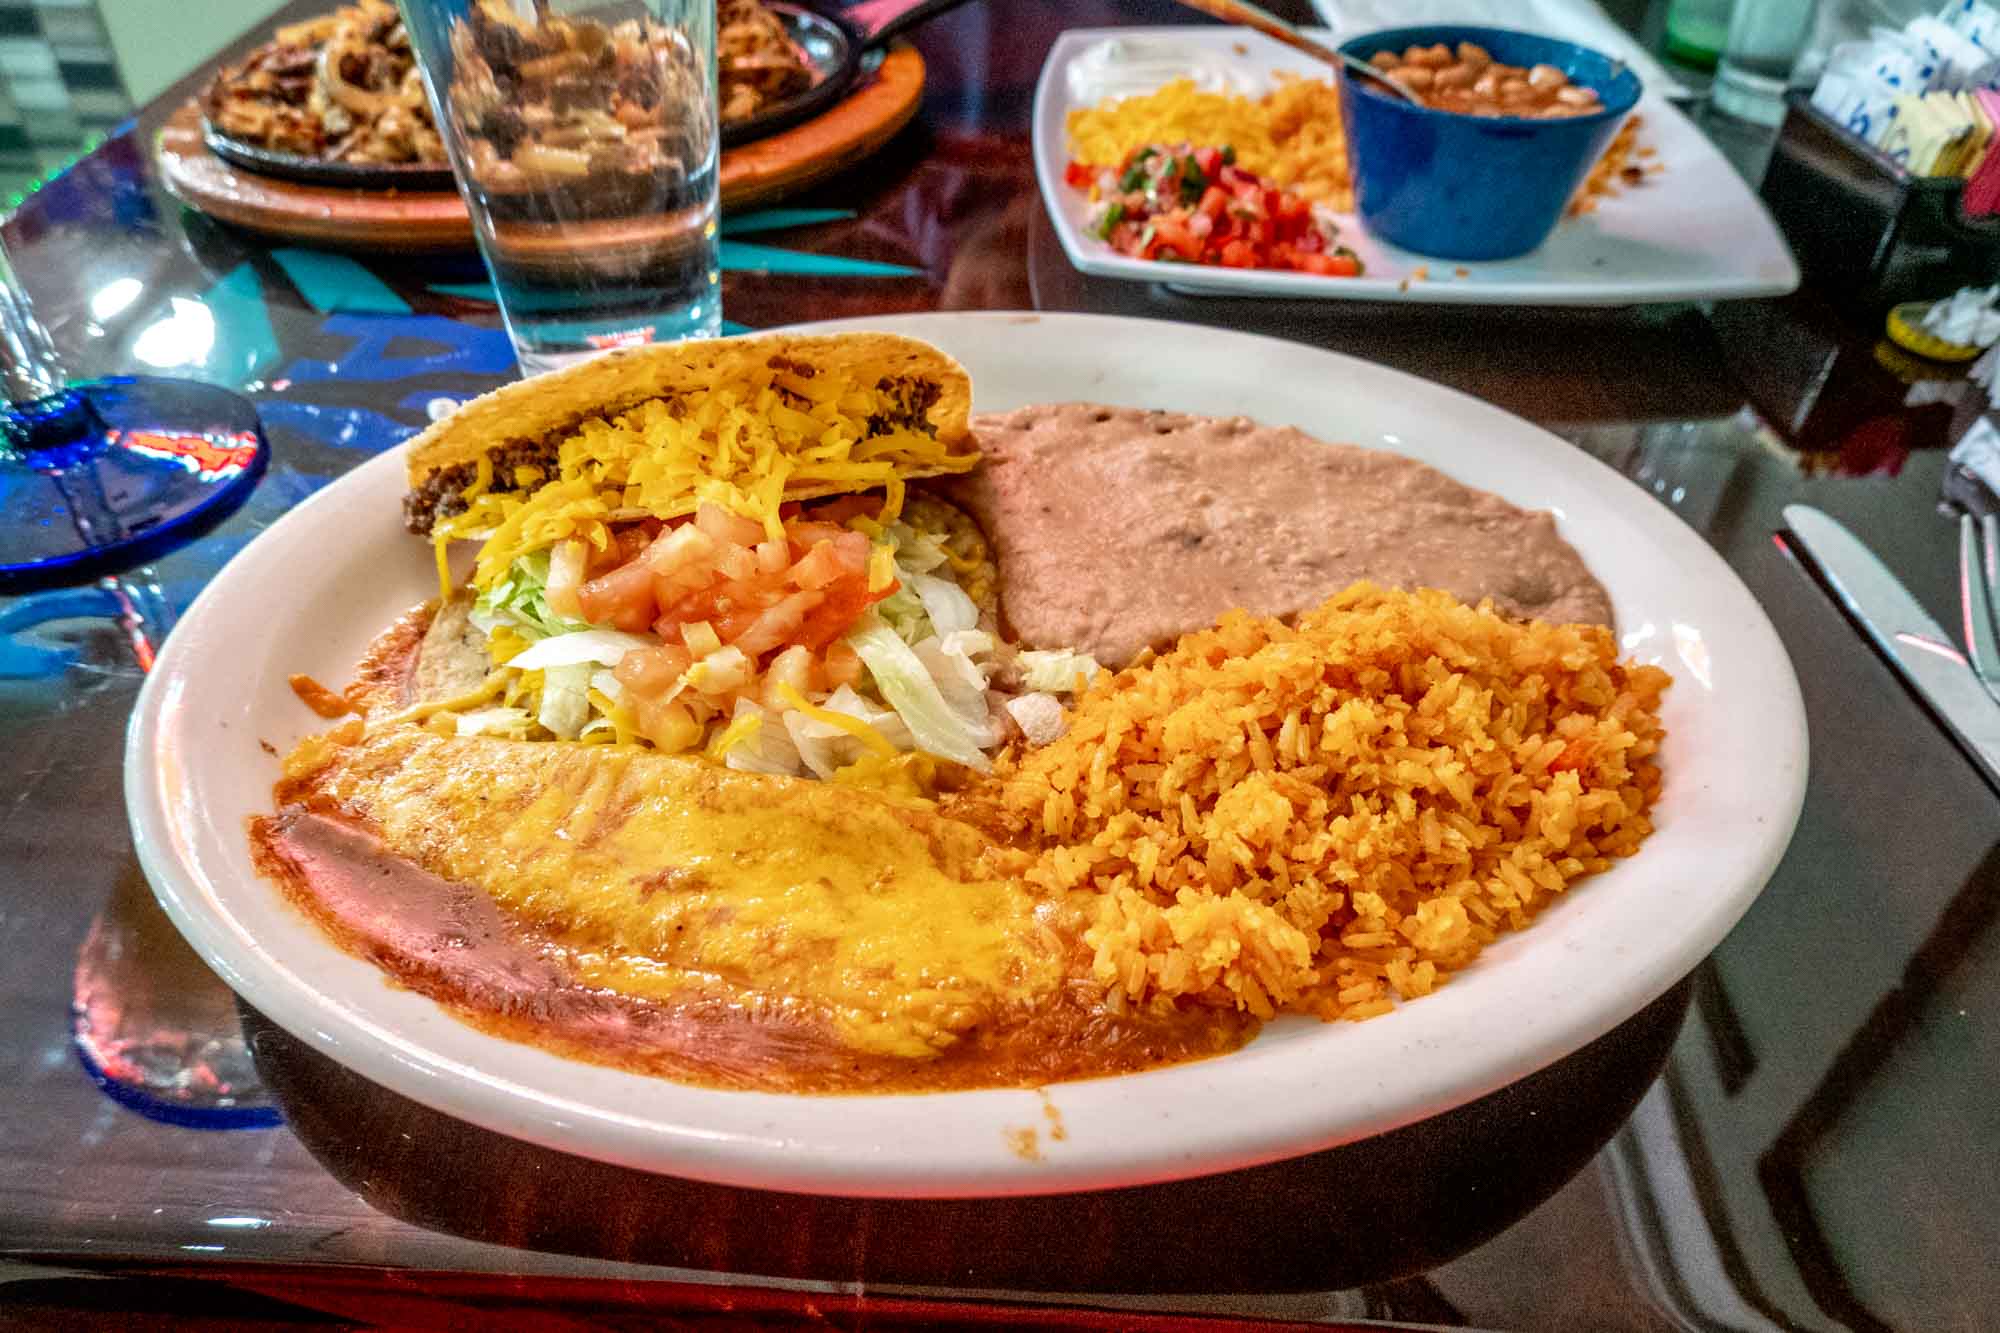 Tacos, enchiladas, and other Tex-Mex foods on a table in a Mexican restaurant.